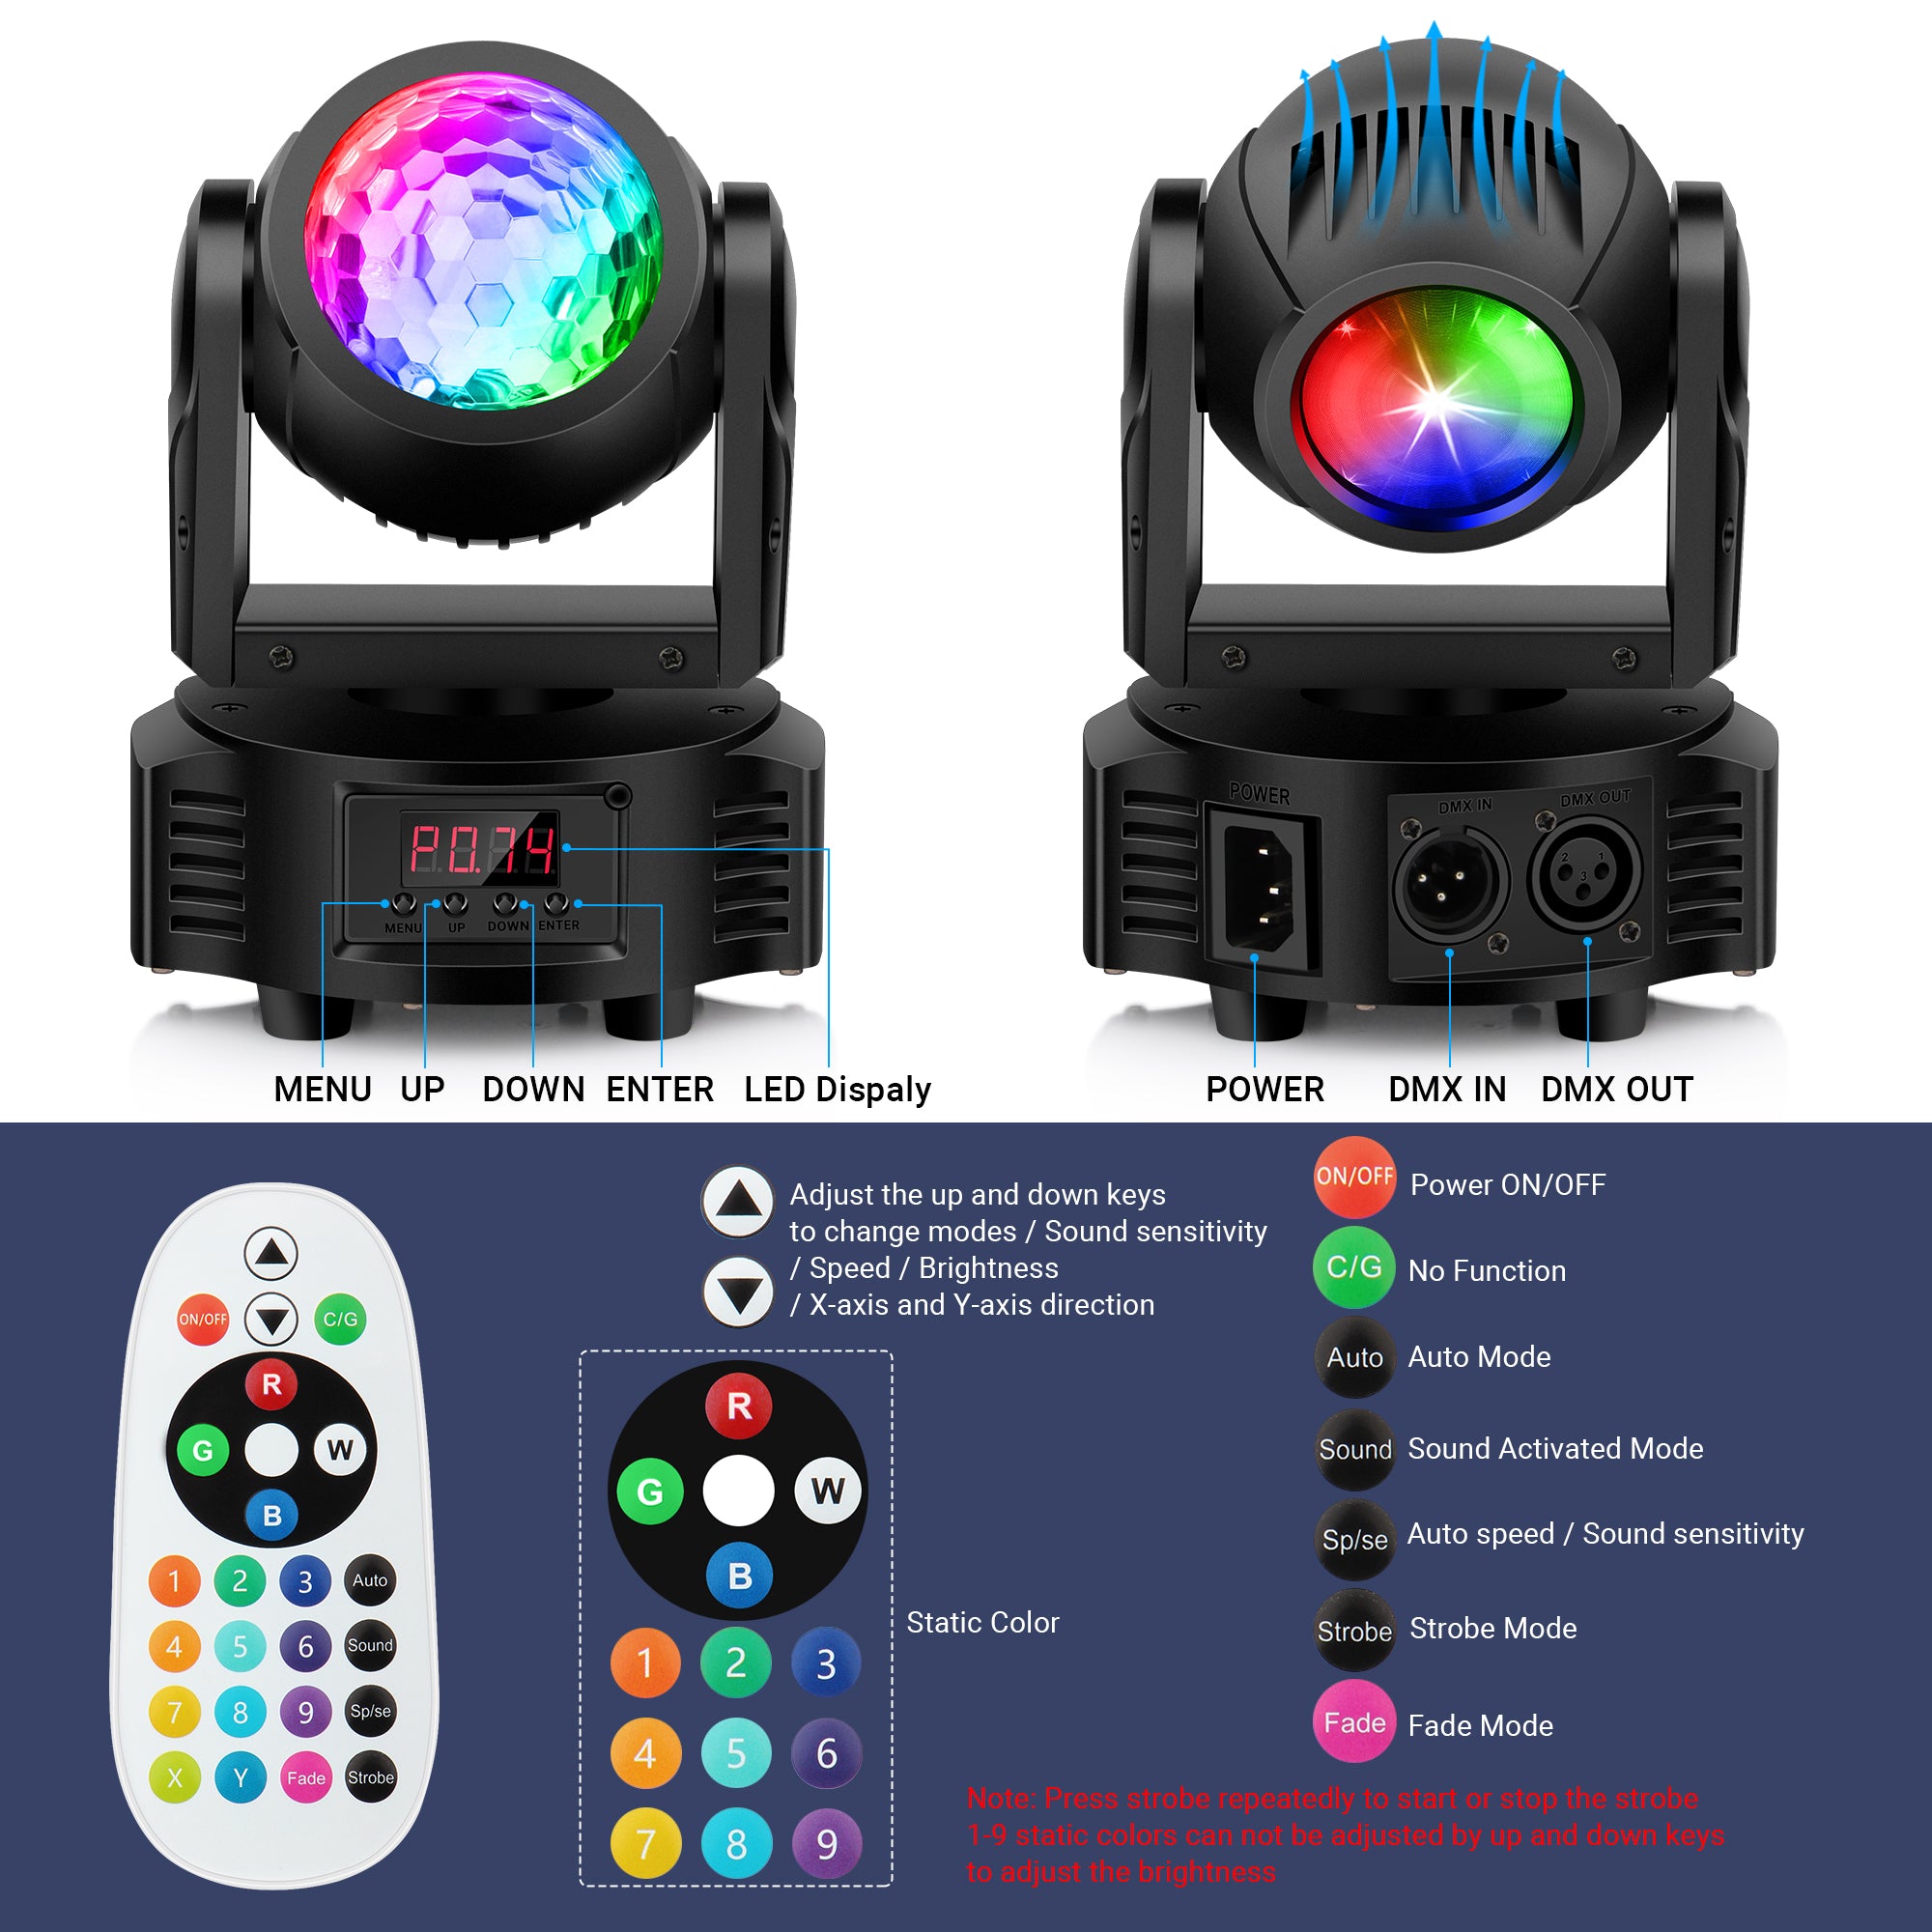 Double Sided Mini Moving Head Light - 40W, RGBW with Disco Ball & Beam